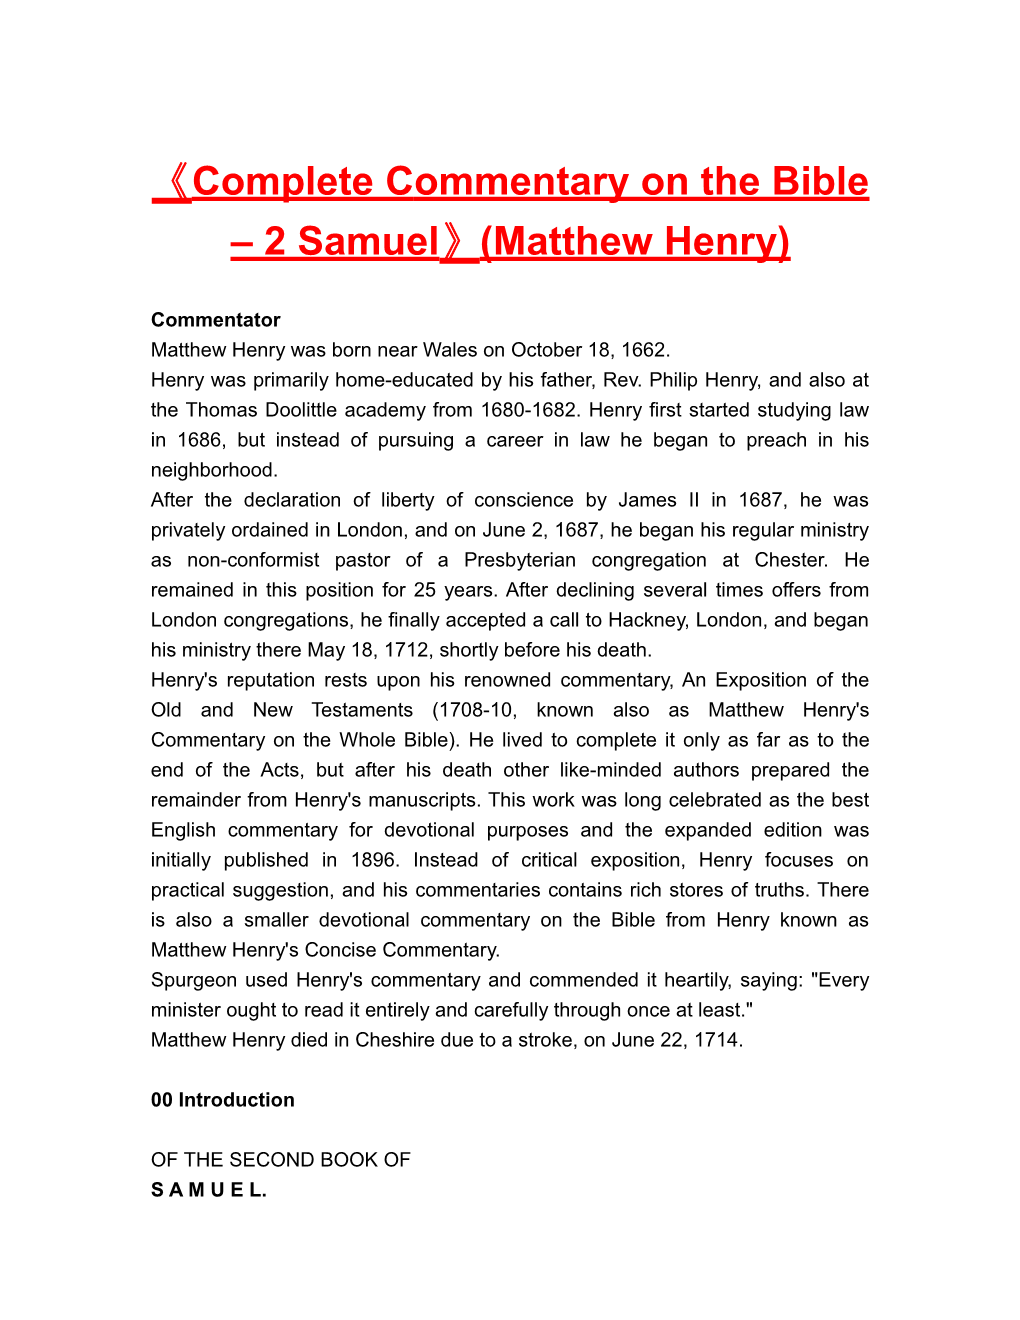 Complete Commentary on the Bible 2 Samuel (Matthew Henry)